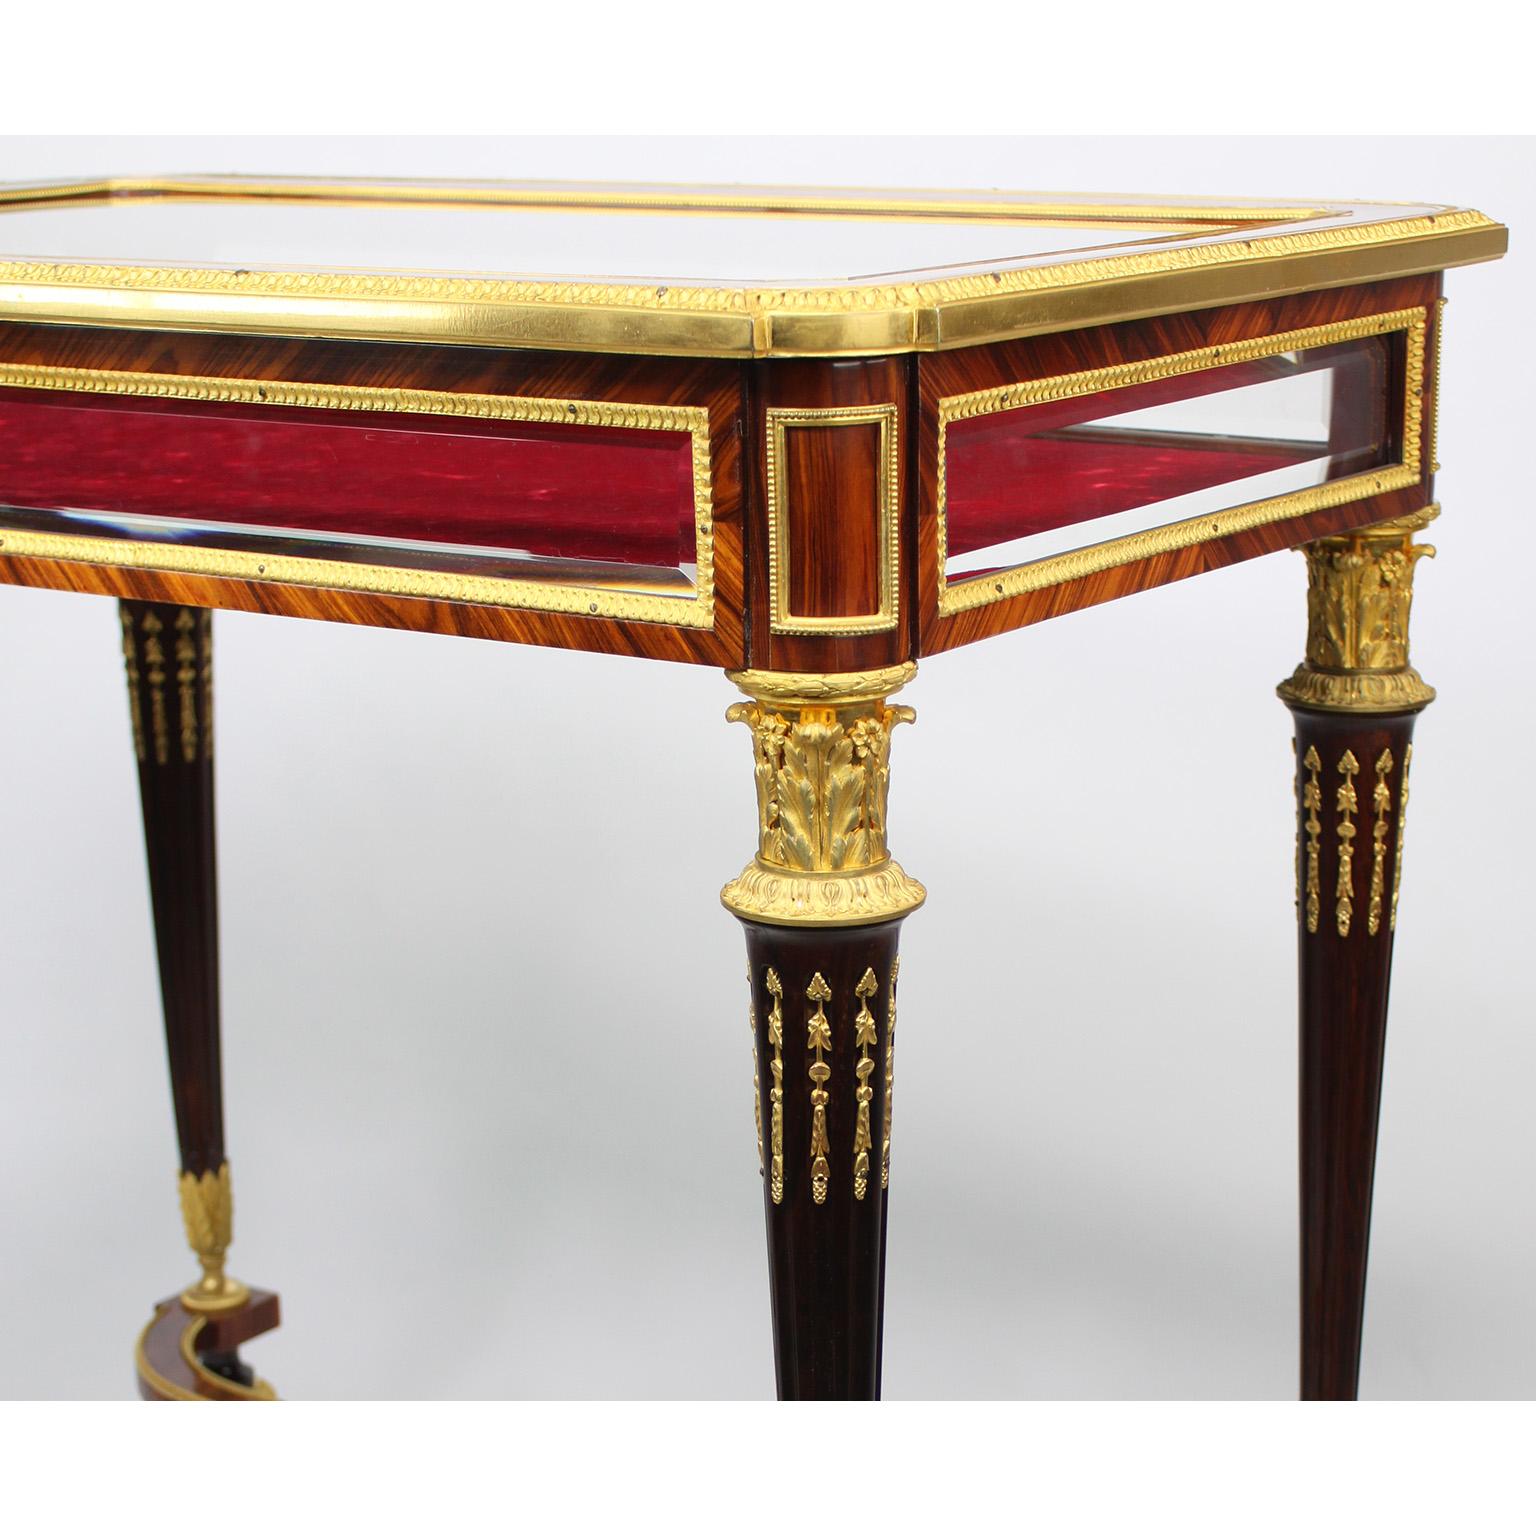 A 19th Century Louis XVI Style Ormolu Mounted Vitrine Table Attr. Henry Dasson  For Sale 6